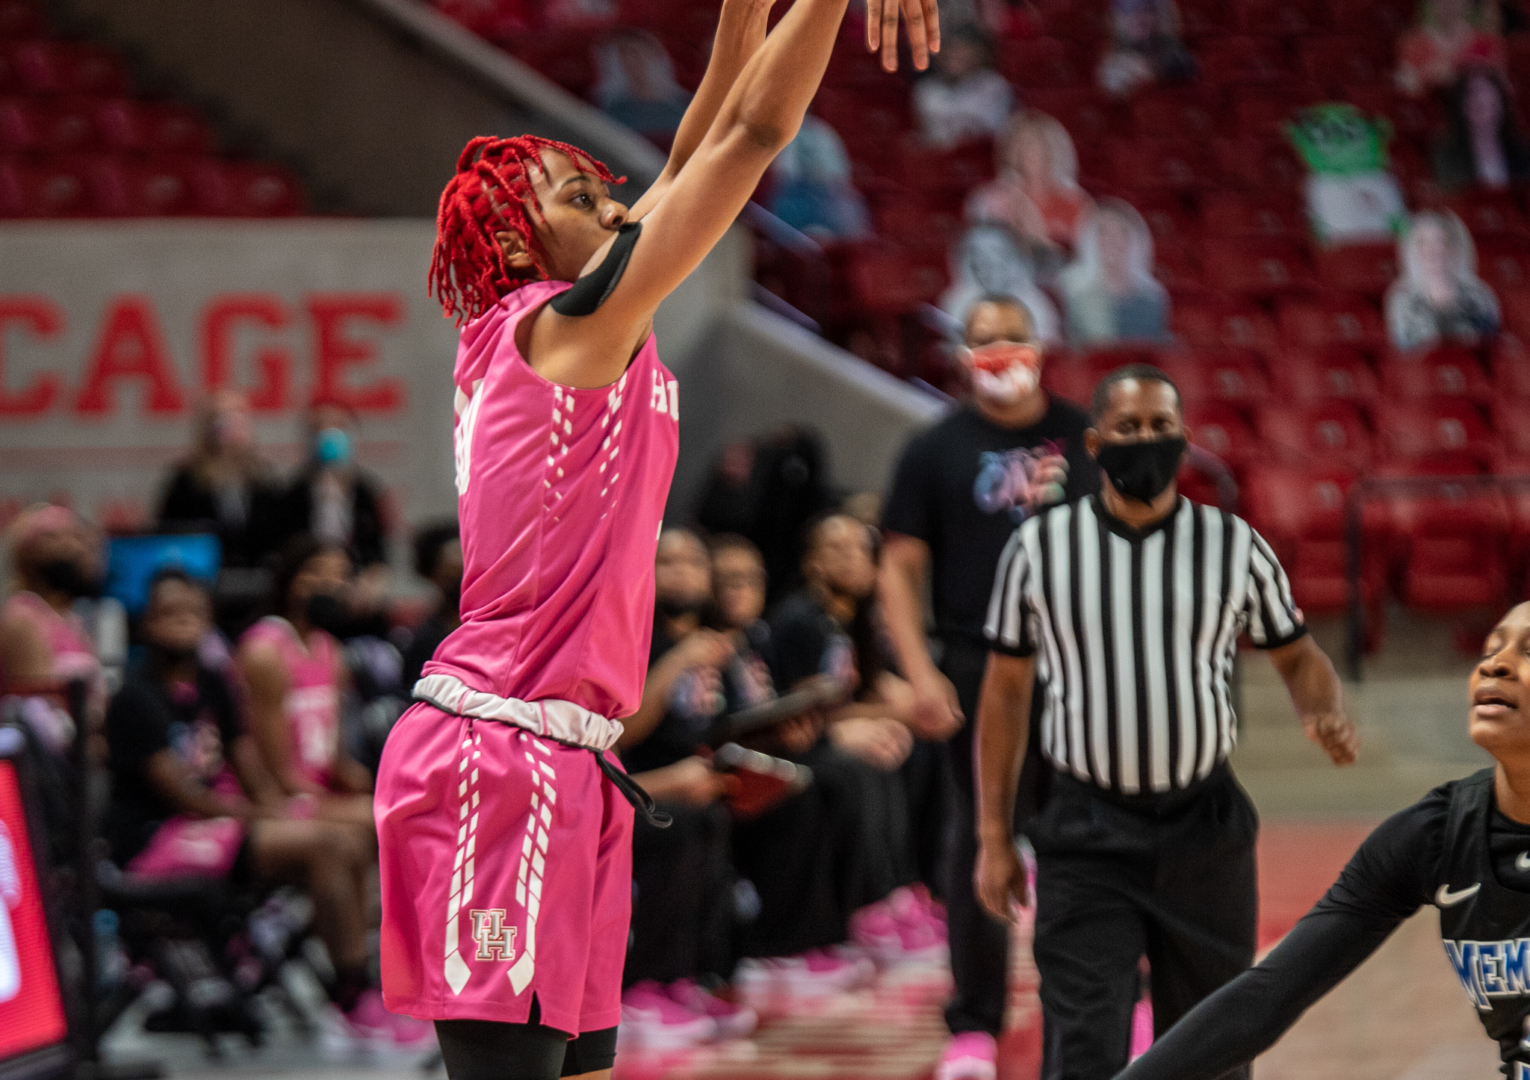 UH women's basketball guard Britney Onyeje releases a 3-point shot in a game against Memphis on Feb. 13 inside of the Fertitta Center. | Andy Yanez/The Cougar